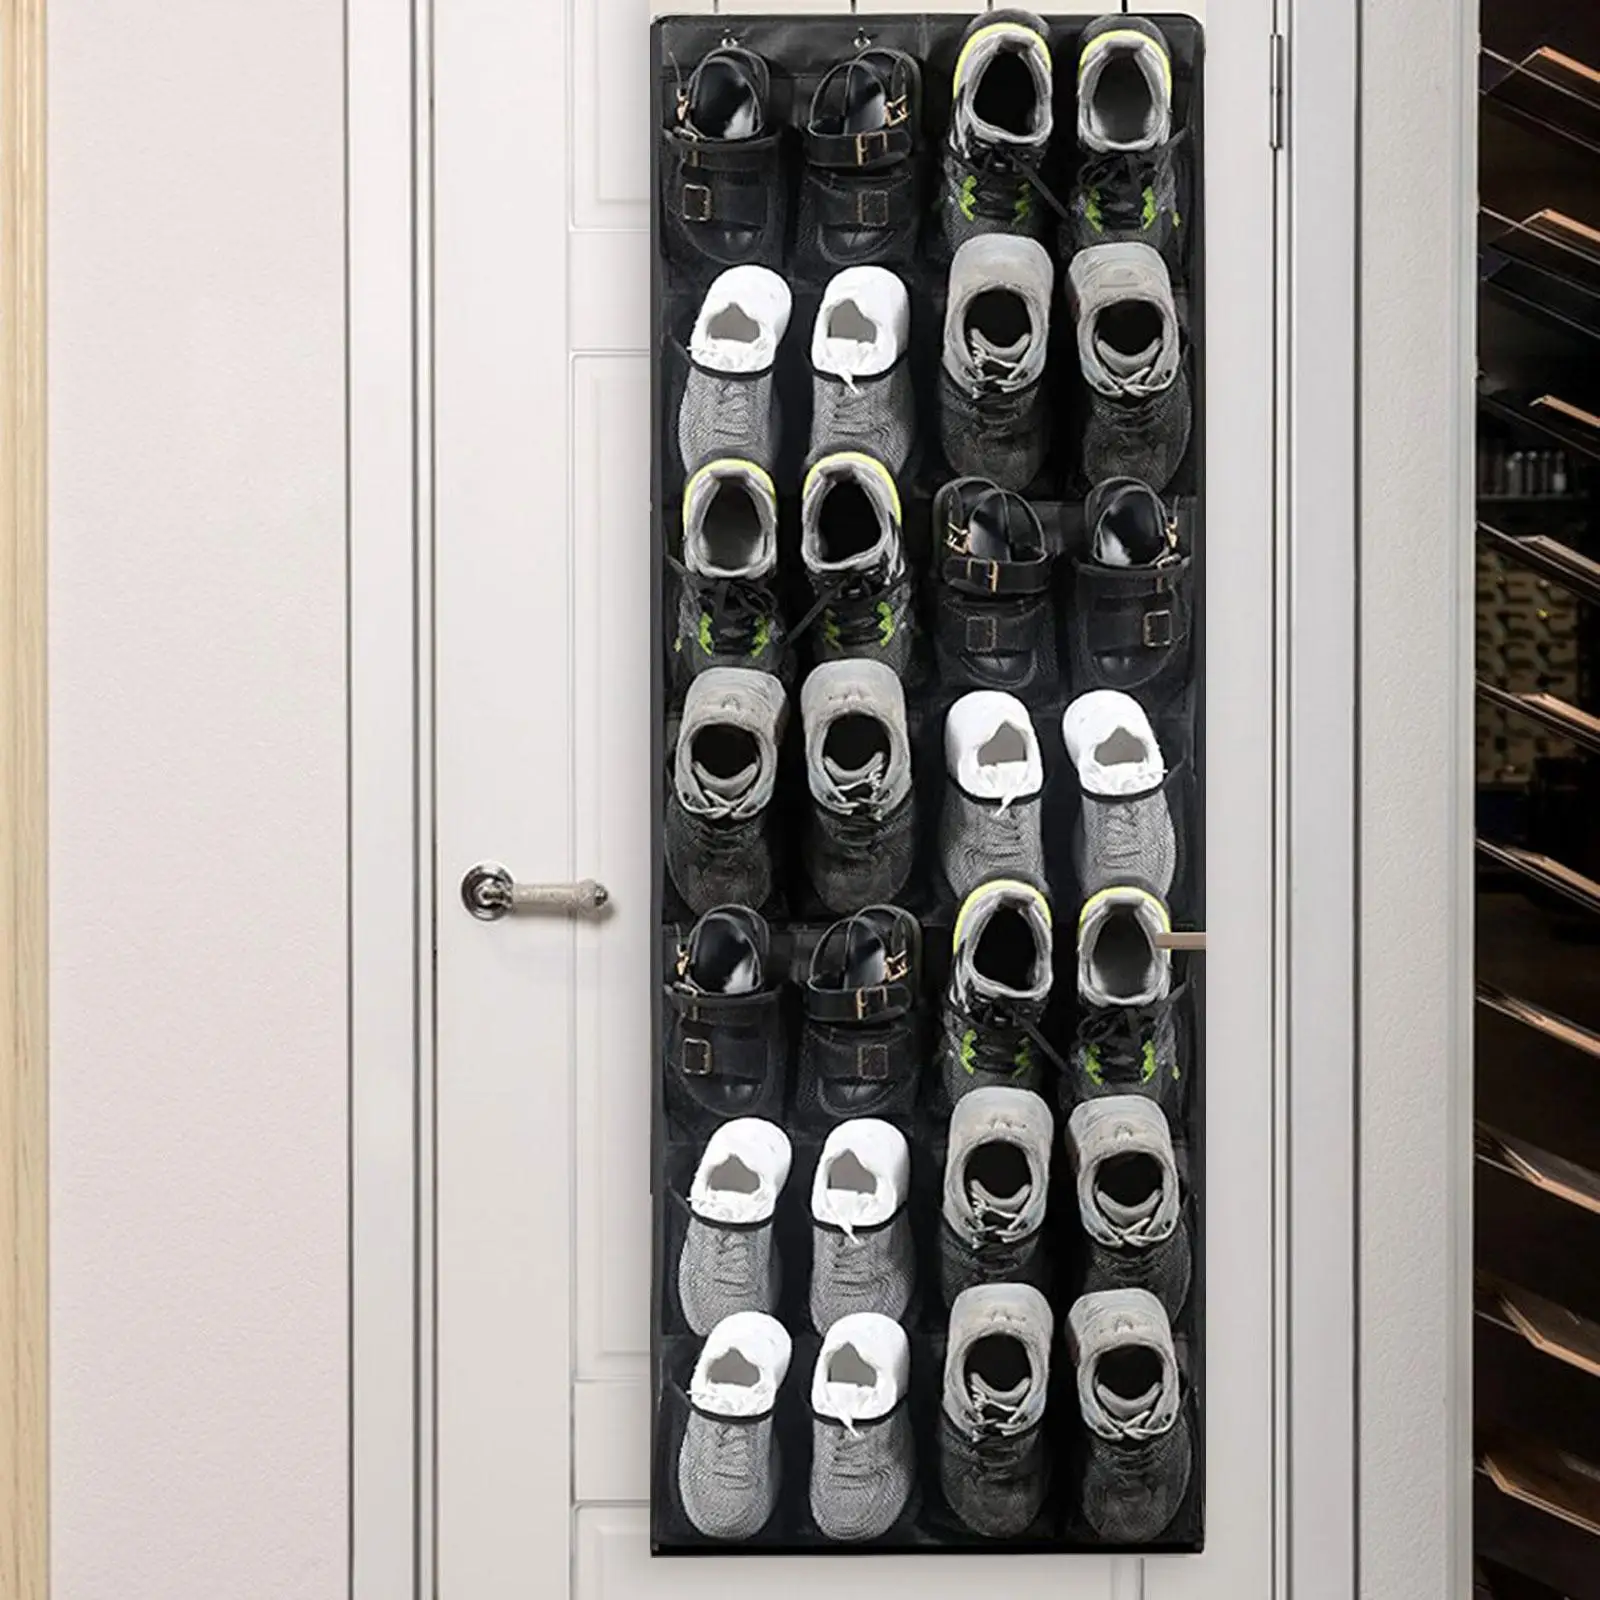 Over The Door Shoe Organizers 28 Durable Mesh Pockets for Slippers Bathroom